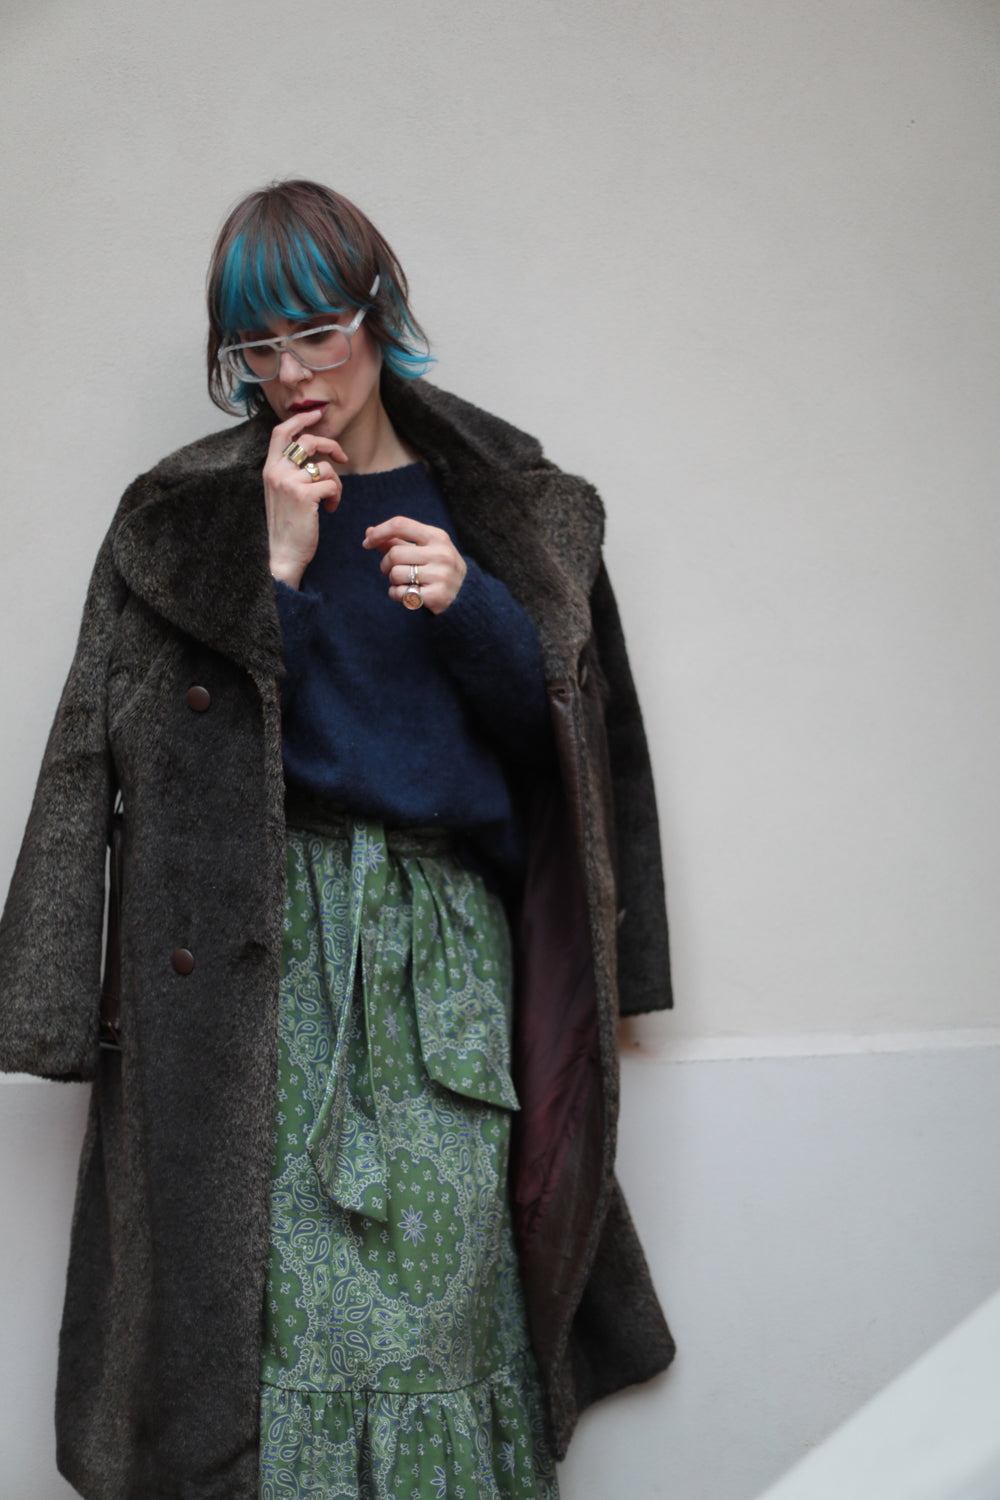 Vintage Seventies Double-Breasted Faux Fur Coat